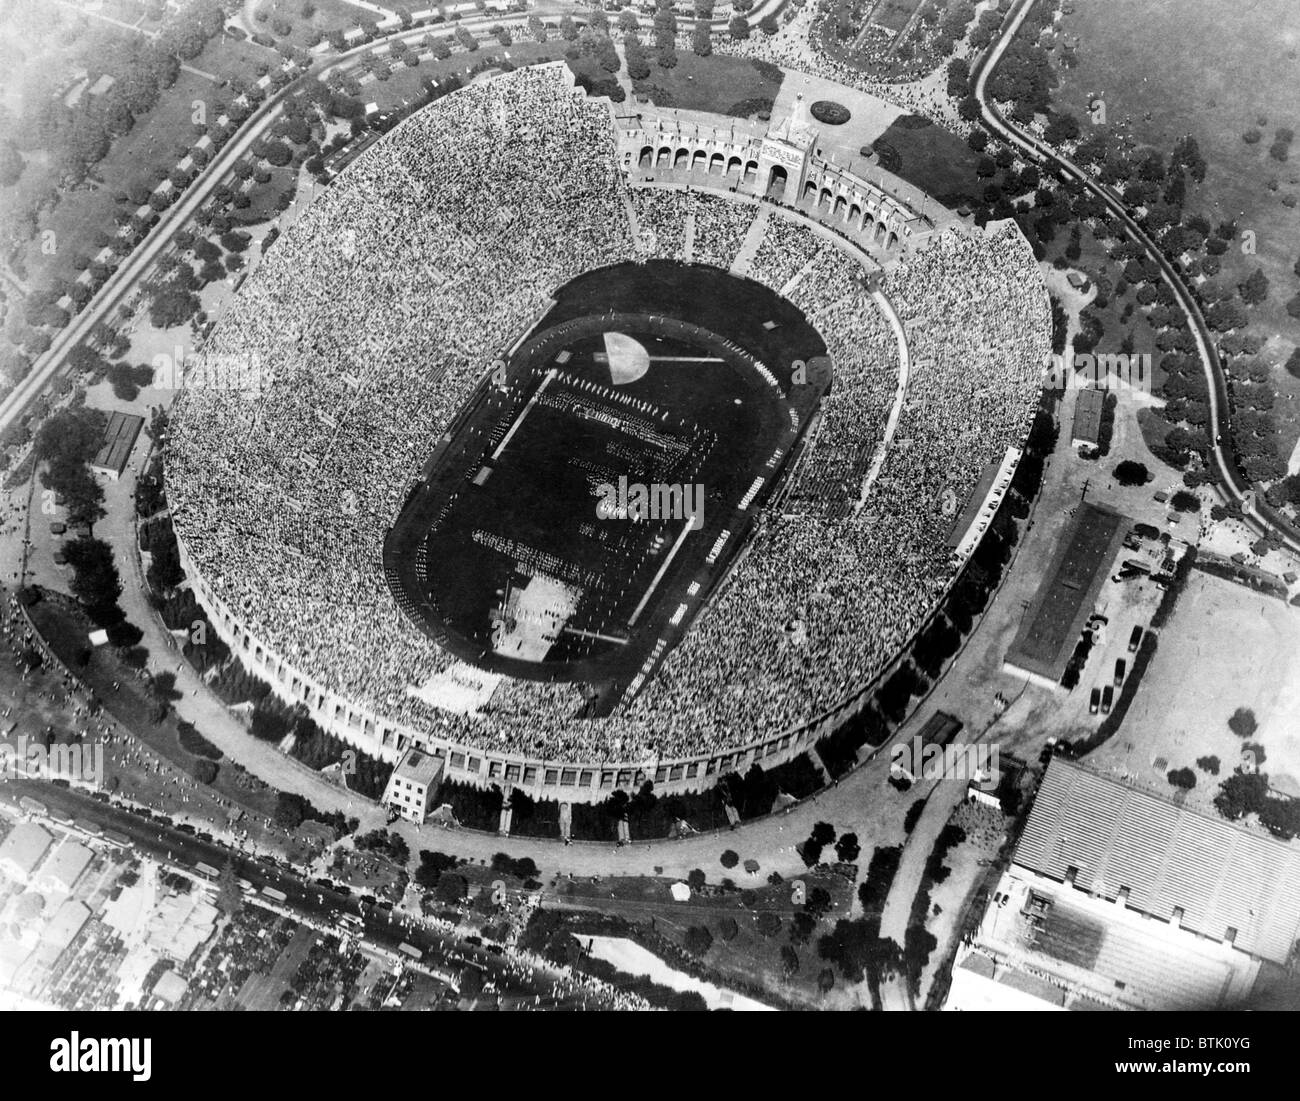 Aerial view of opening day games at the 1932 Olympics, Memorial Coliseum, Los Angeles California. July 16, 1932. Courtesy: CSU A Stock Photo